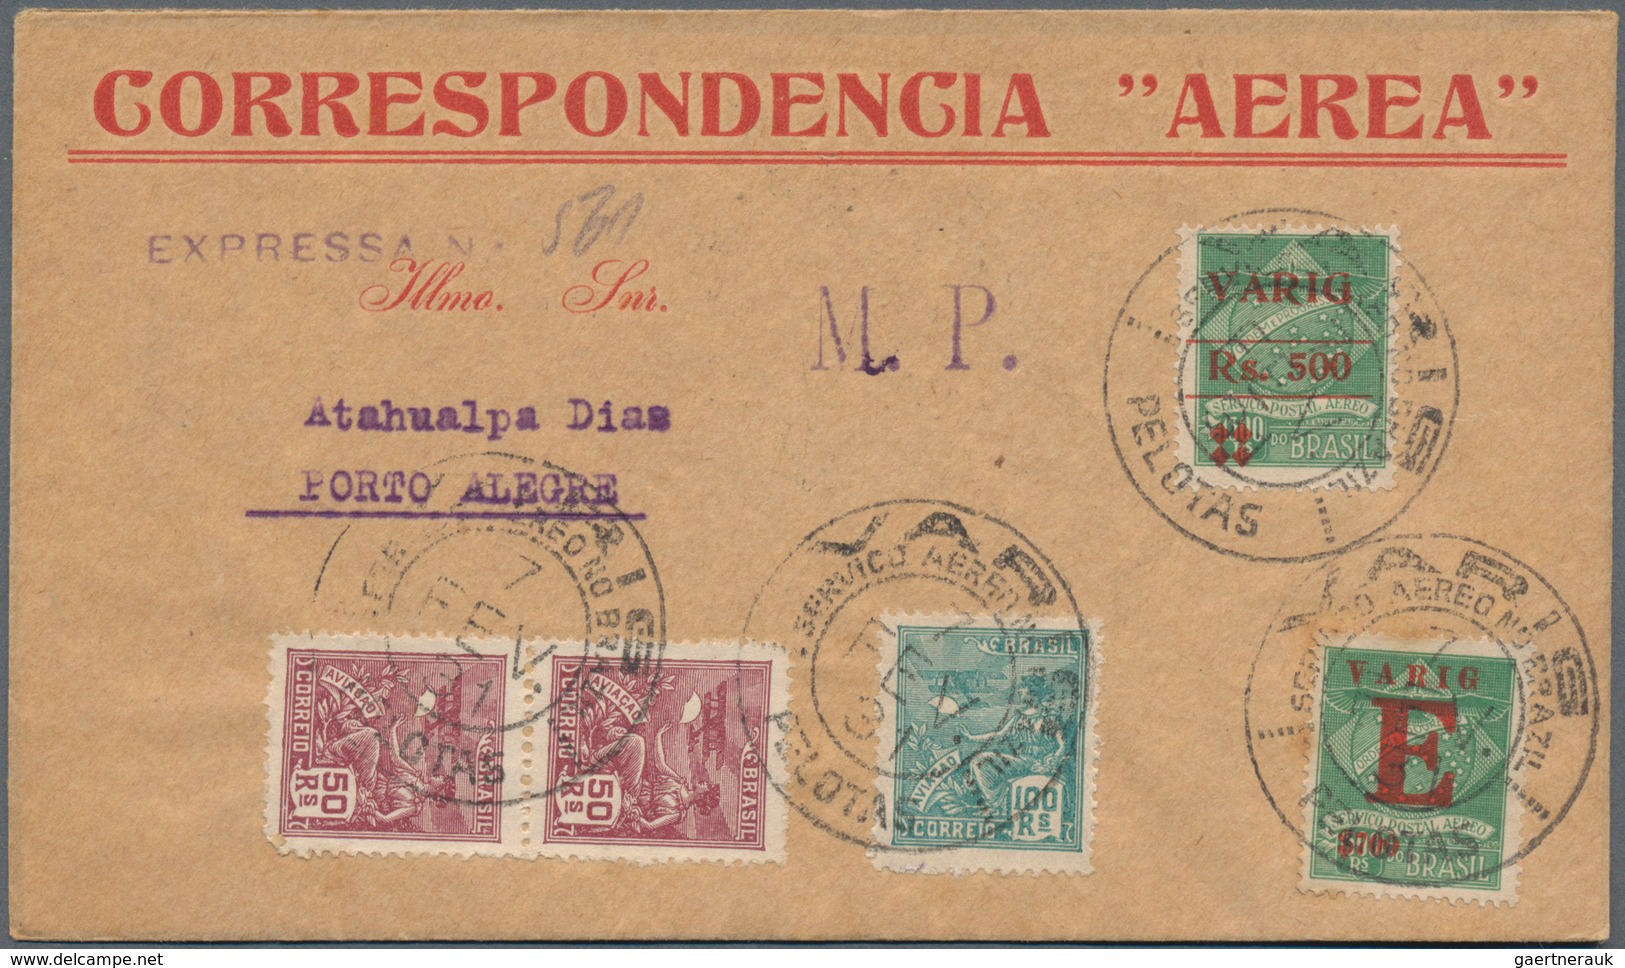 Flugpost Alle Welt: 1909/1940, very comprehensive collection with ca.160 airmail covers/cards, compr